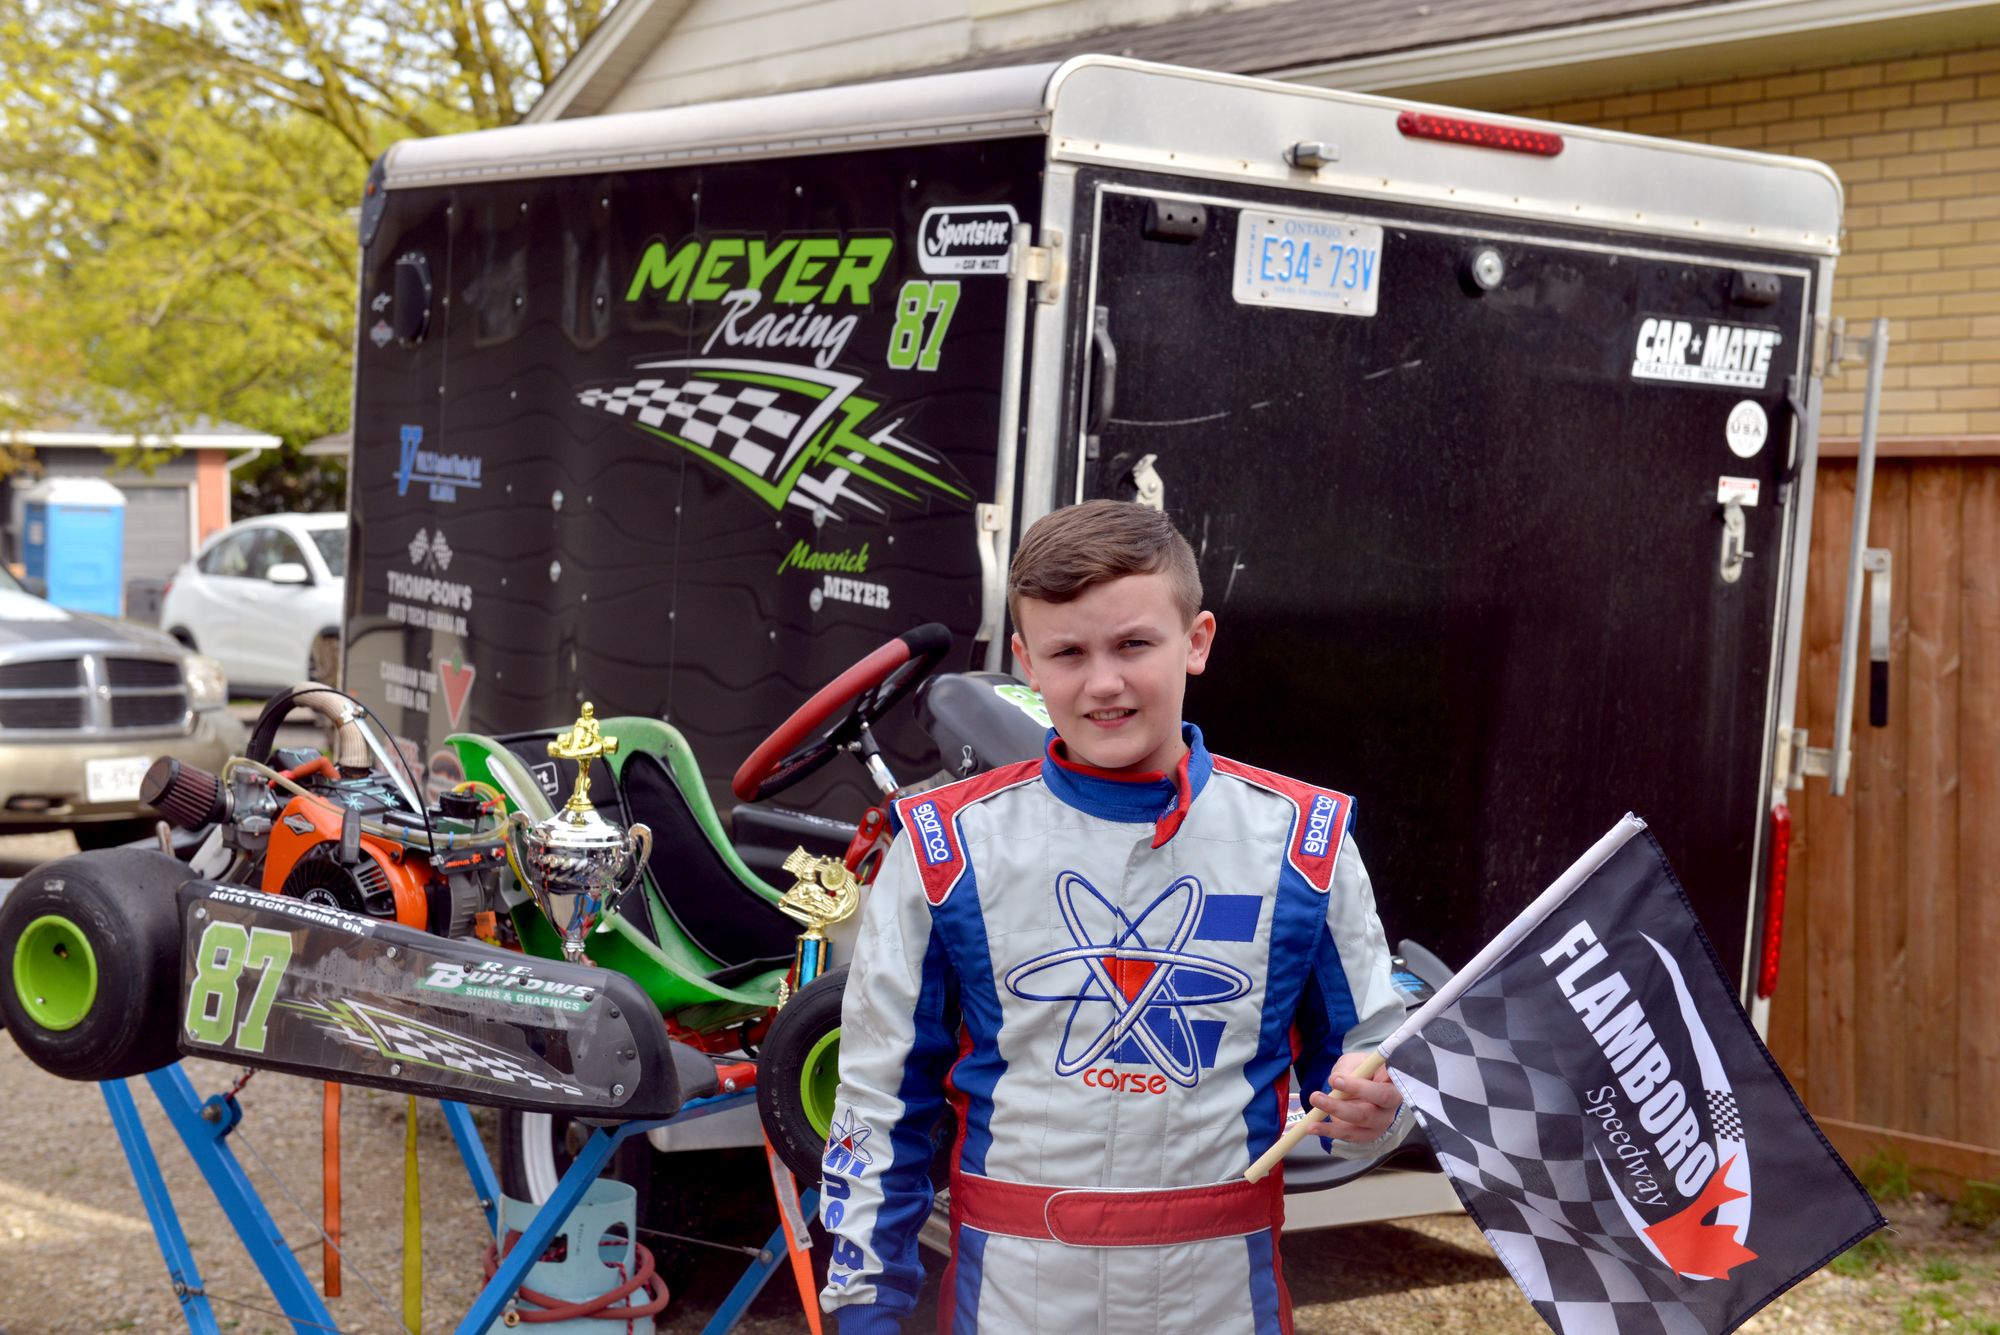 Young local racer making his mark on the go-kart circuit